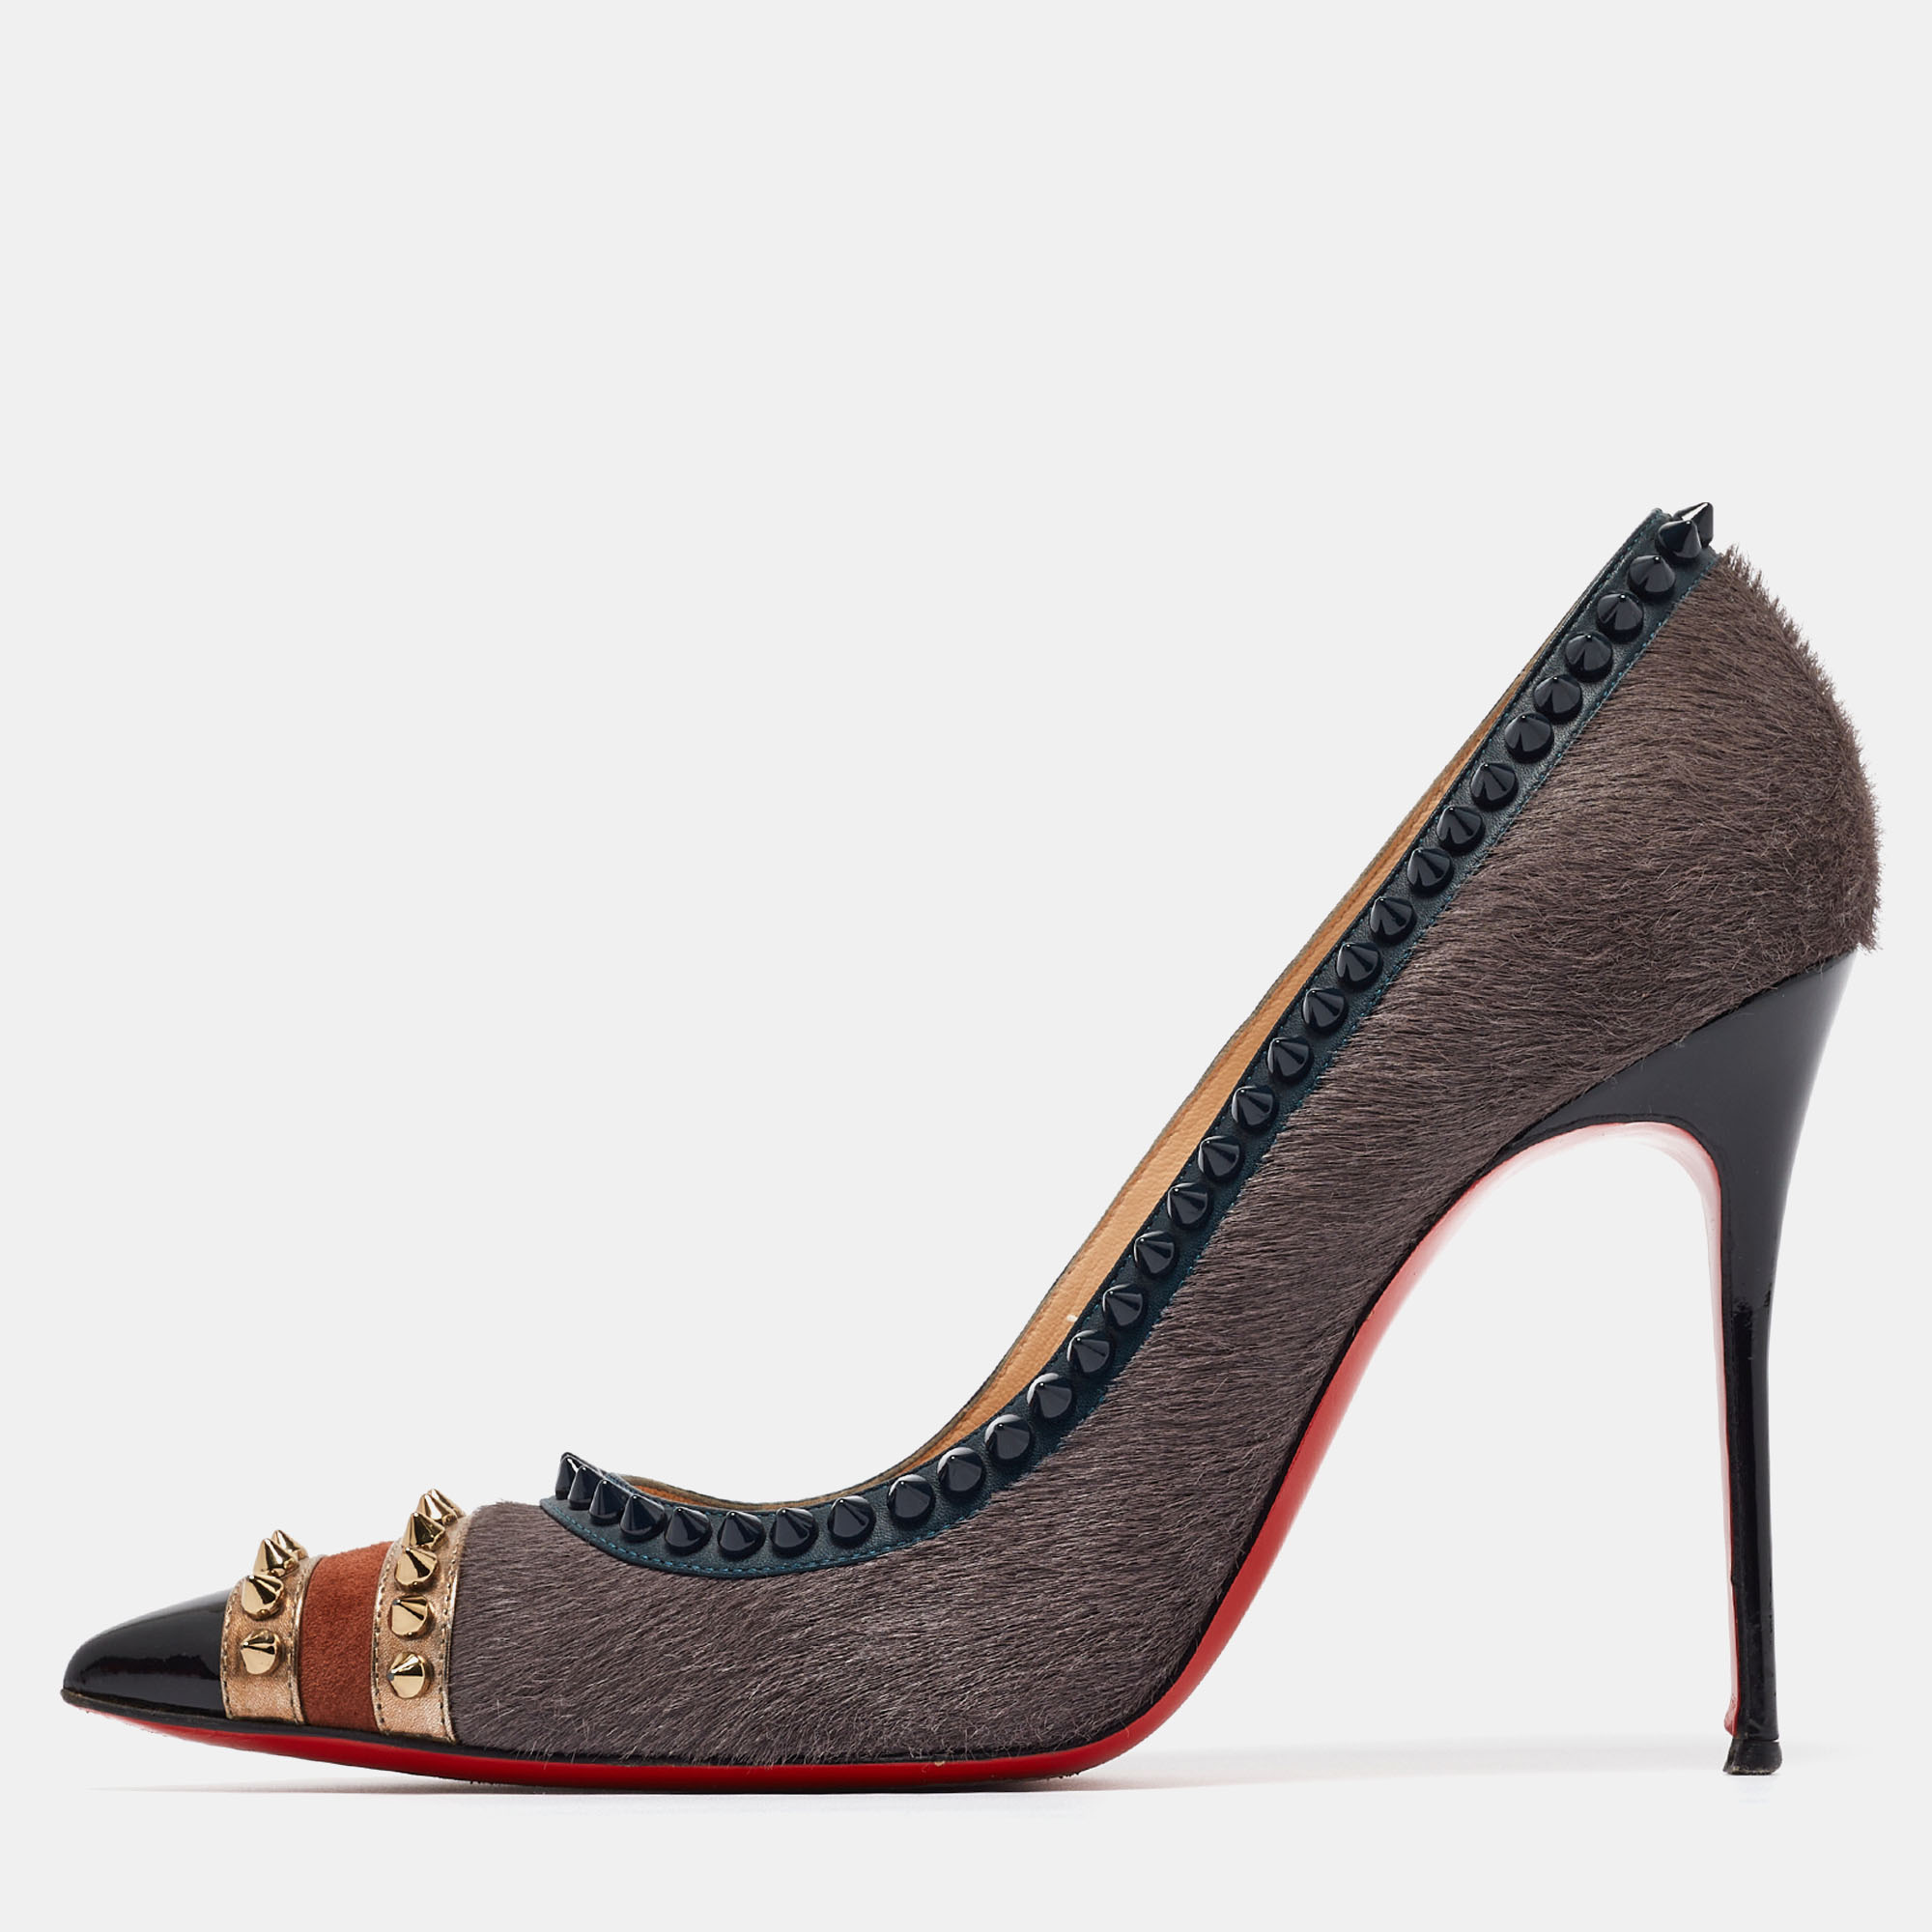 

Christian Louboutin Multicolor Calf Hair and Leather Malabar Hill Spiked Pointed Toe Pumps Size